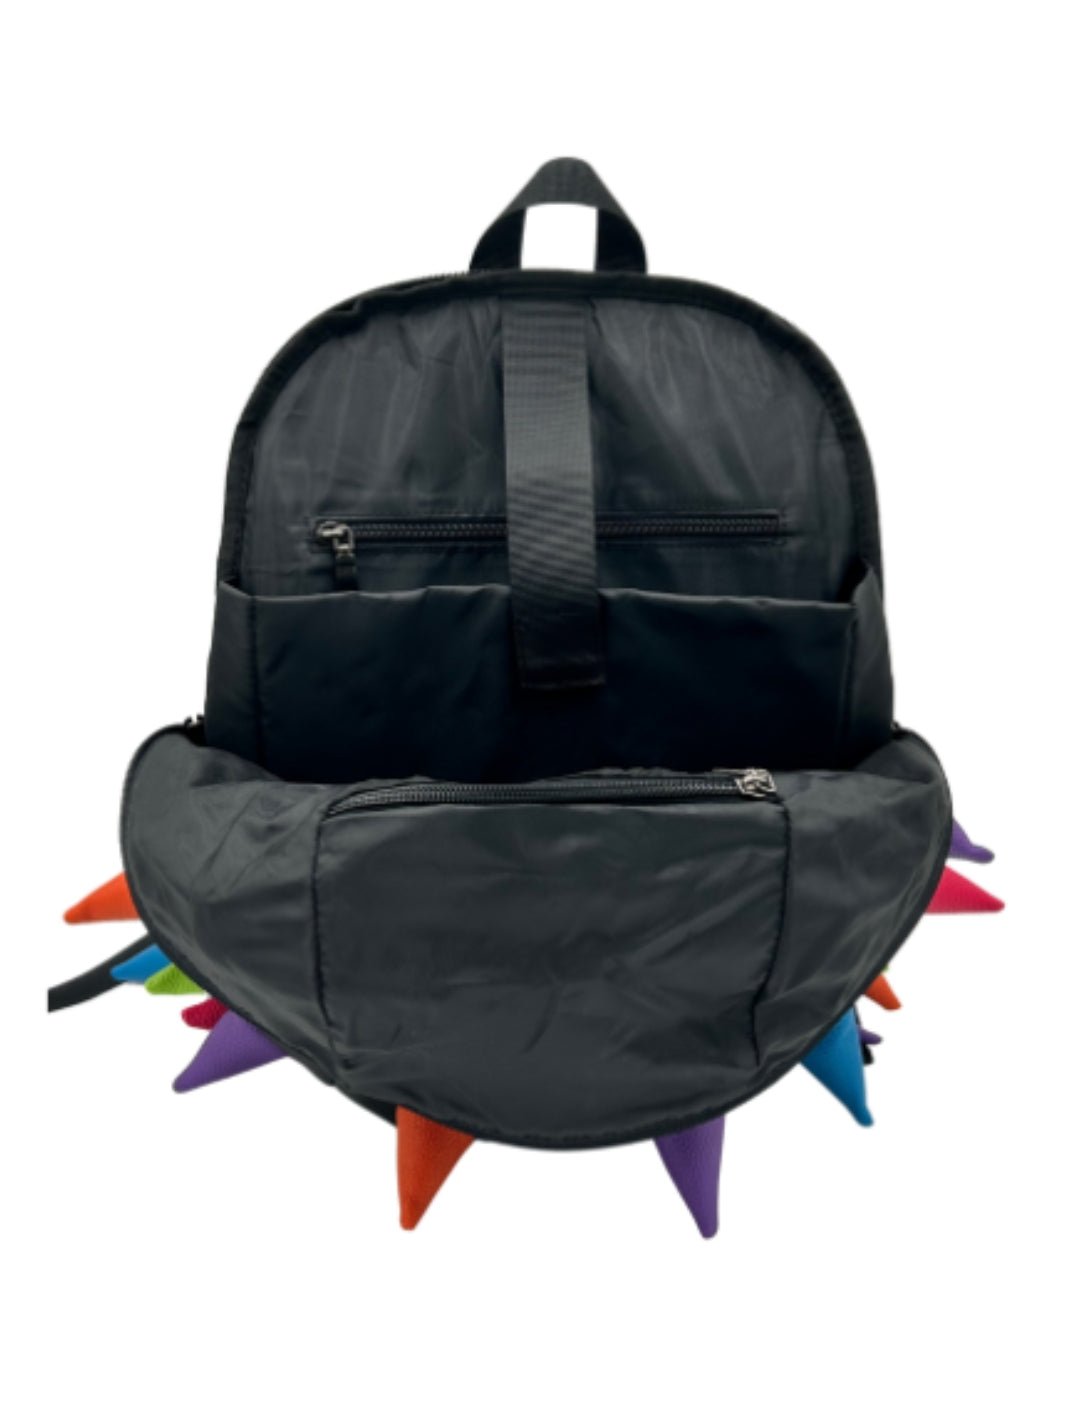 Laptop Compartment of Abracadabra Colorful Backpack with Spikes | Madpax